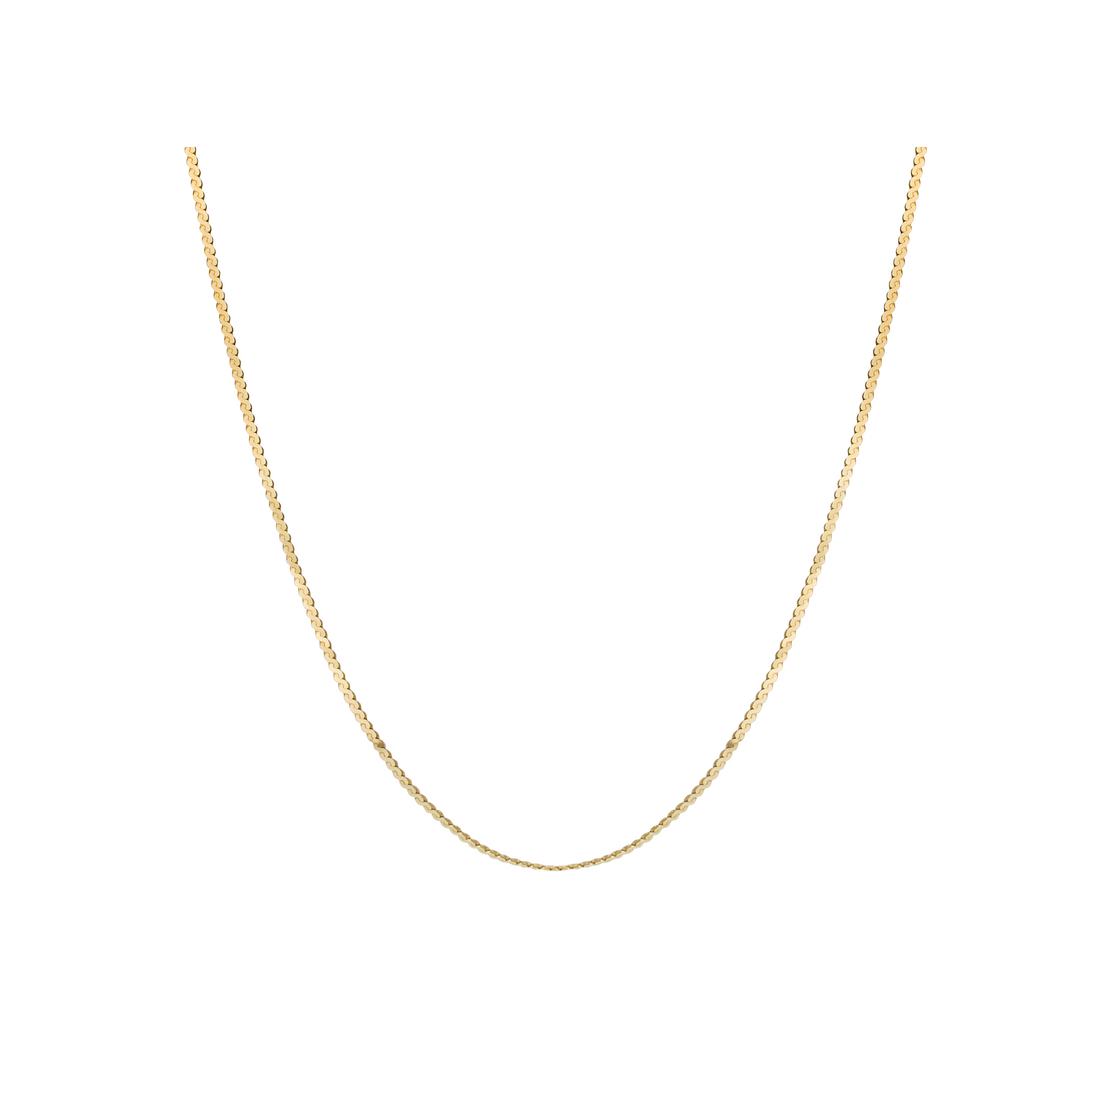 Snake Chain Necklace in 9ct Yellow Gold - Robert Anthony Jewellers, Edinburgh